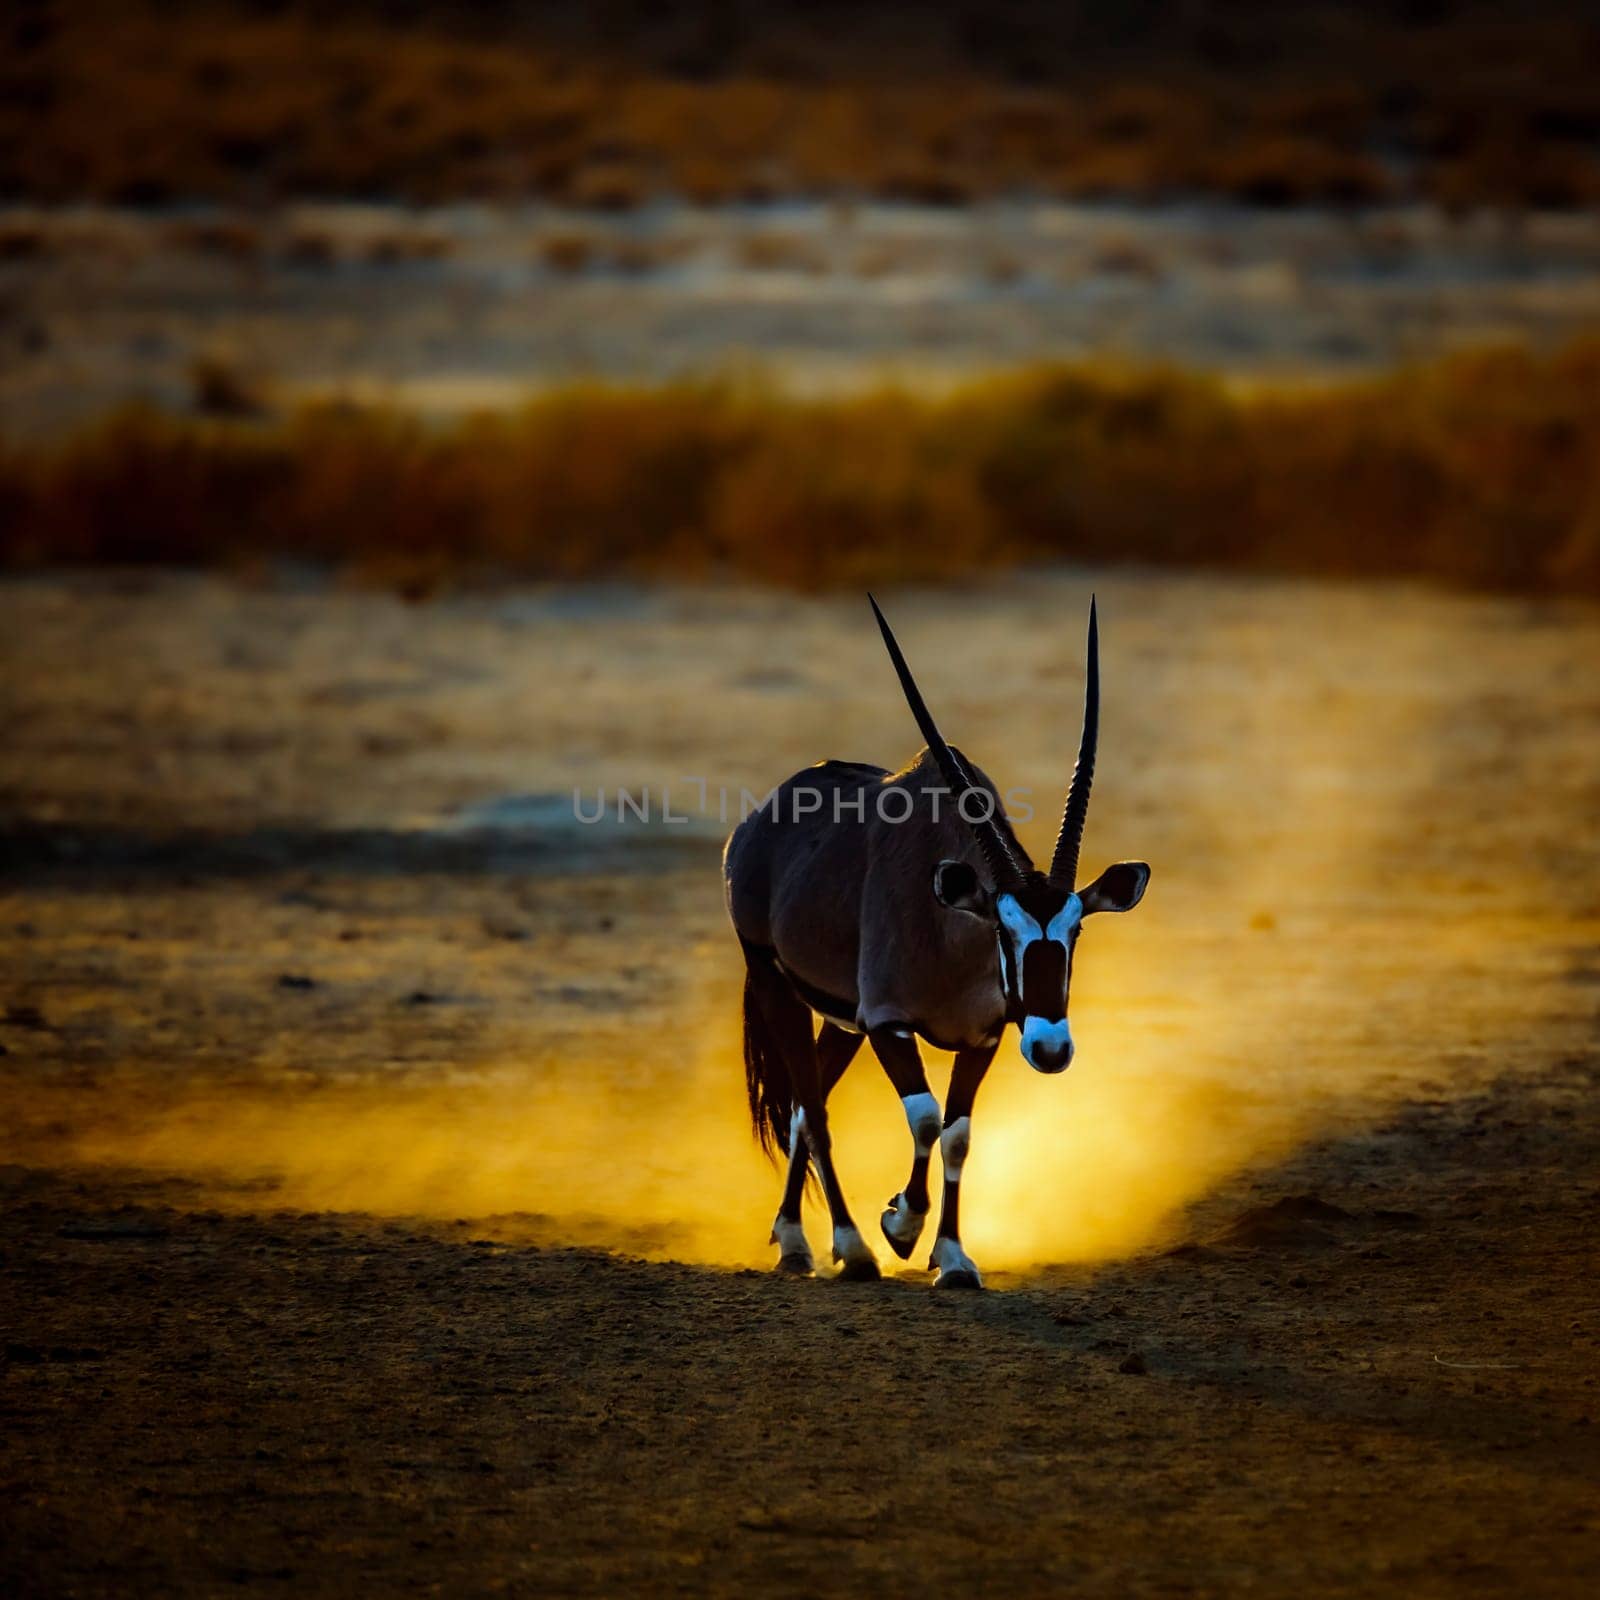 South African Oryx walking front view in sand at sunset in Kgalagadi transfrontier park, South Africa; specie Oryx gazella family of Bovidae